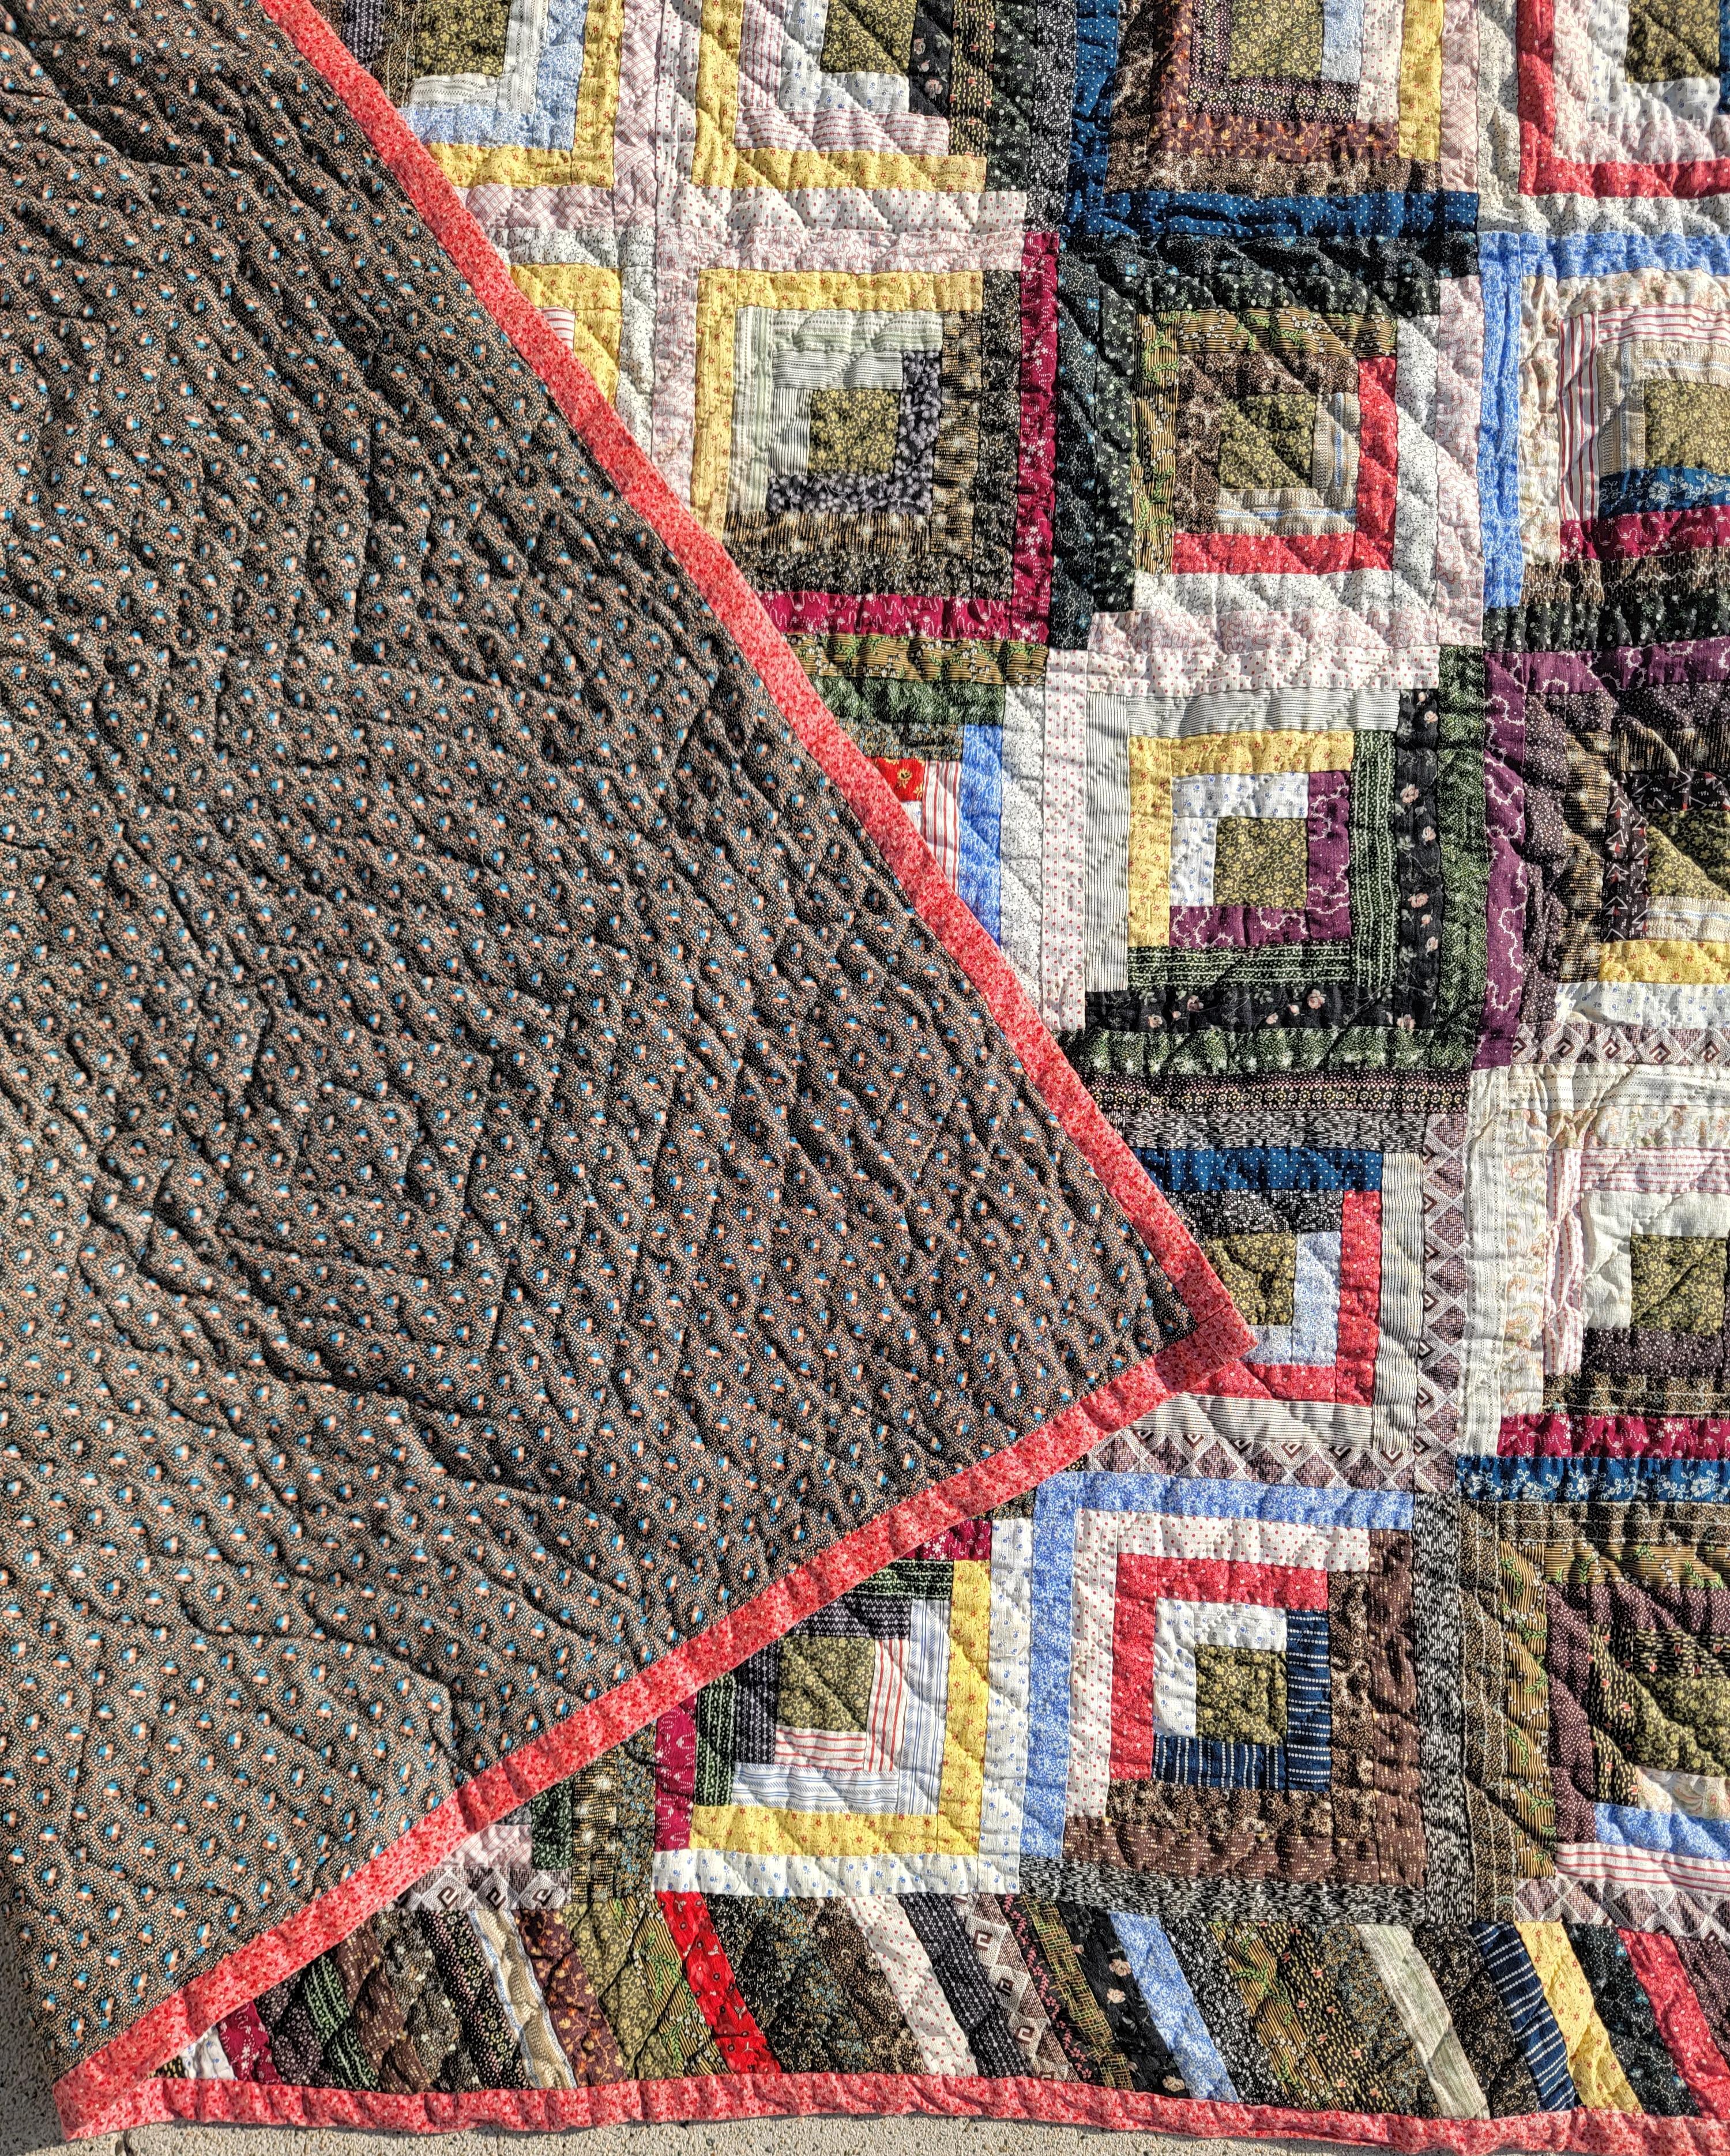 Hand-Crafted 19Thc Cotton Log Cabin Quilt From Pennsylvania